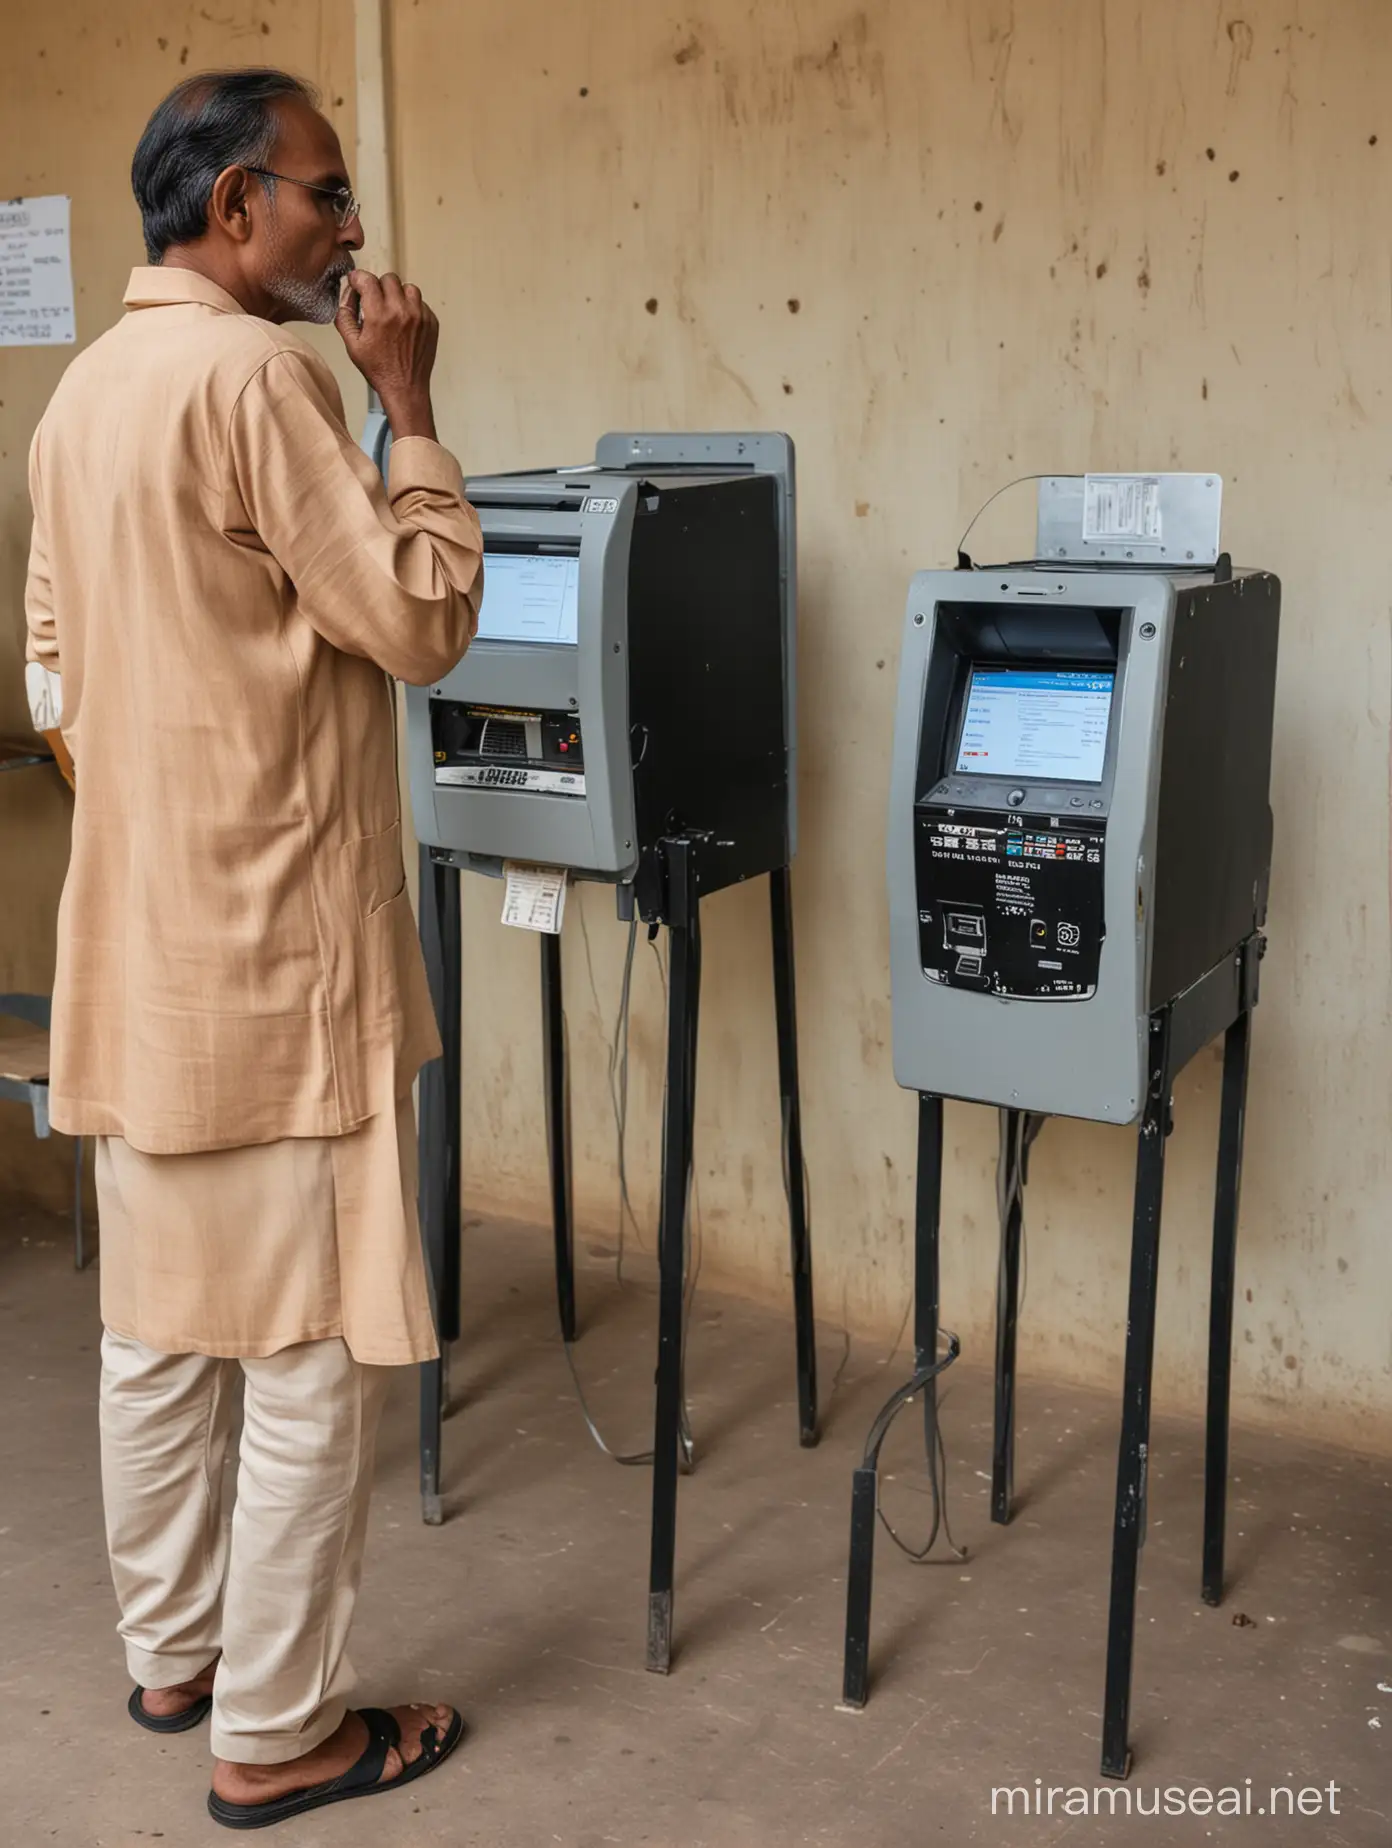 Contemplative Indian Voter at Electronic Voting Machine